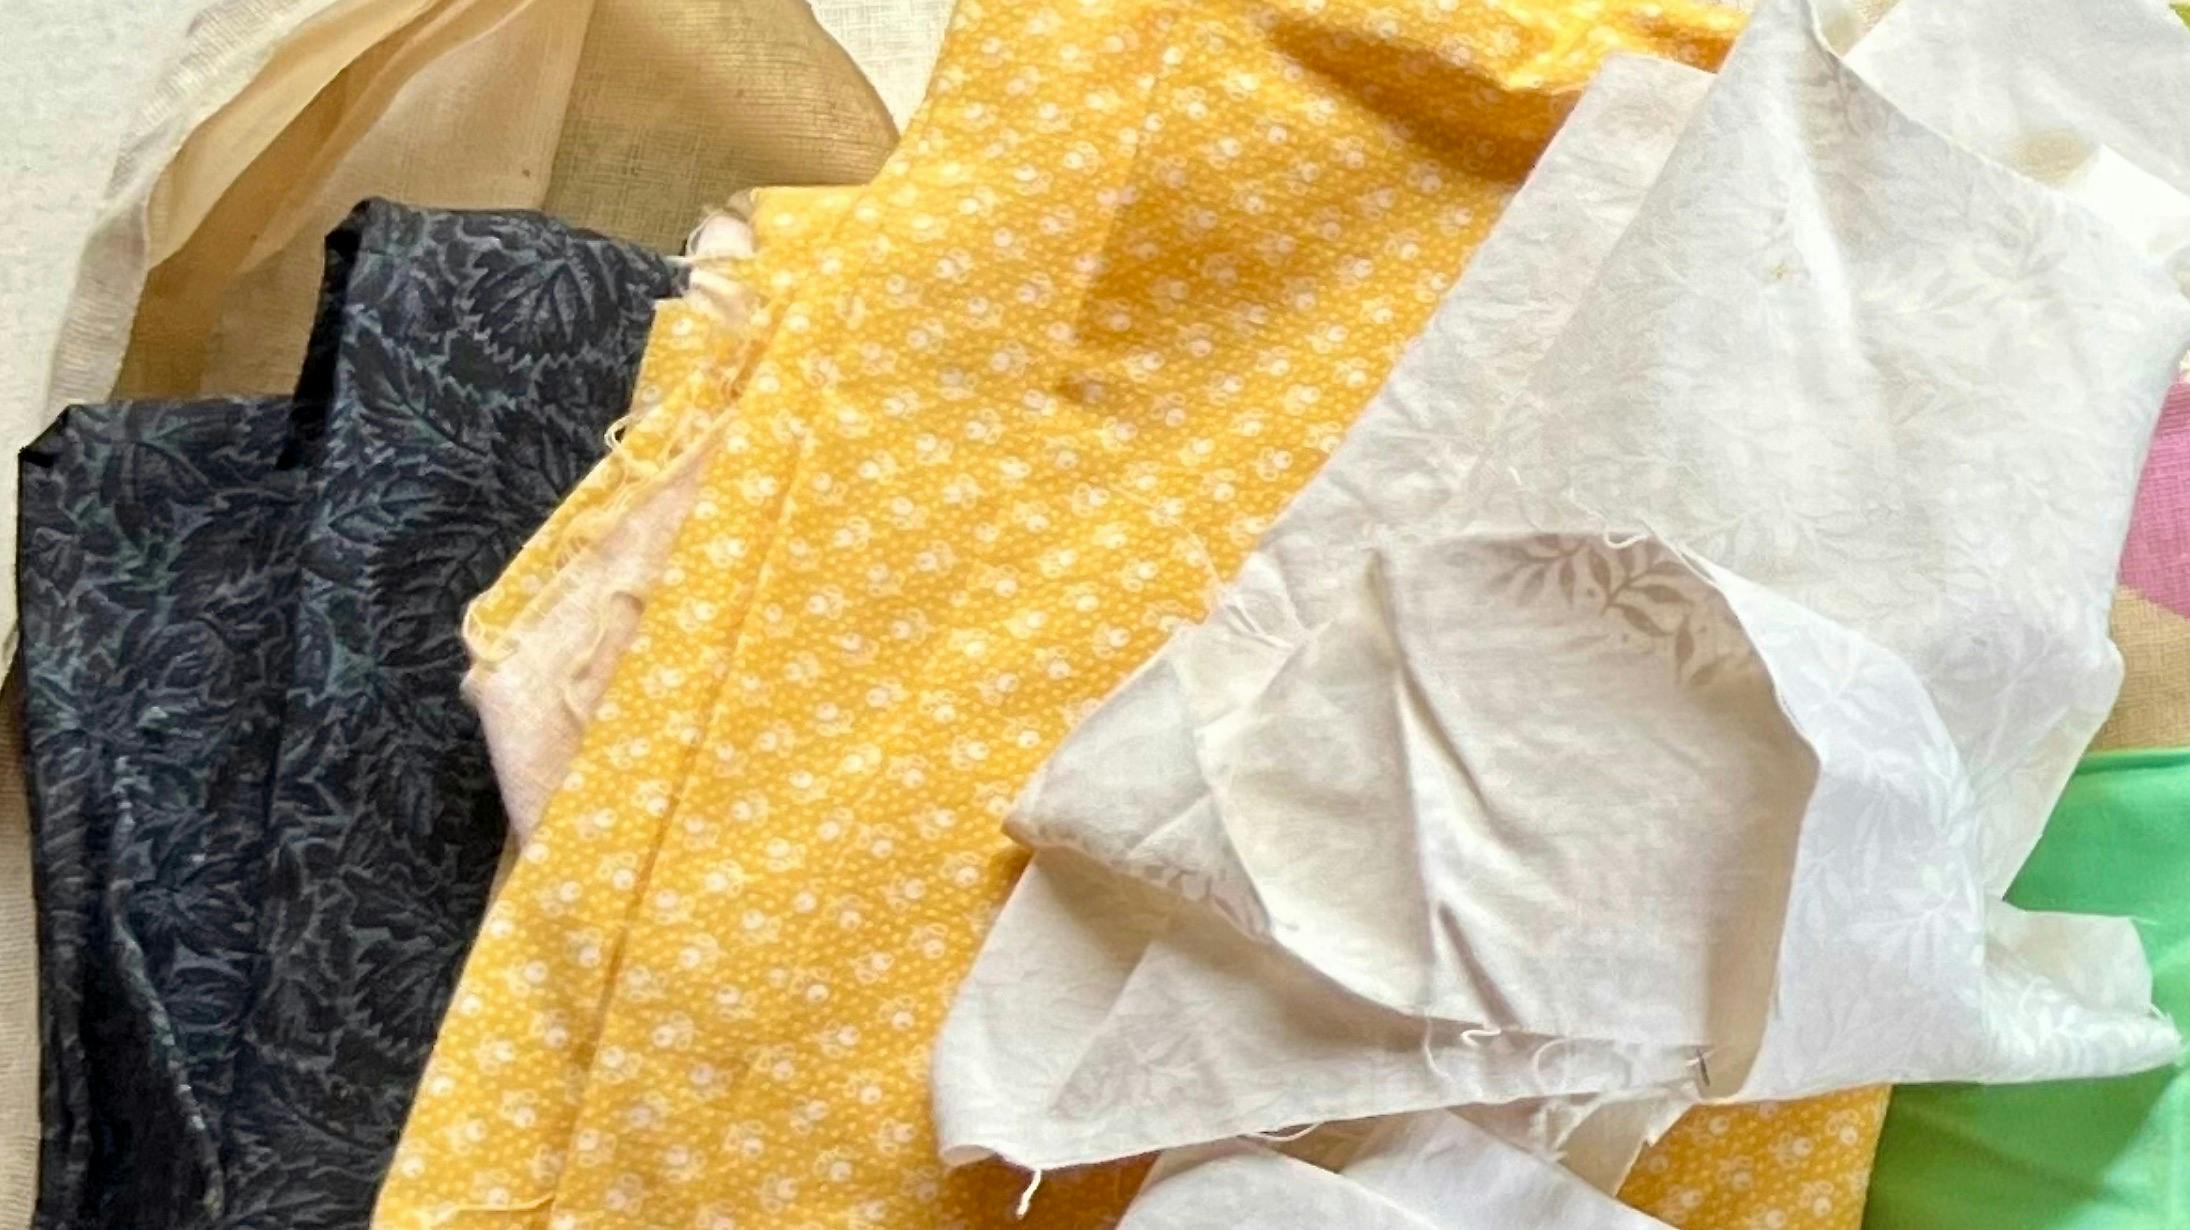 Black, white, and yellow fabrics with tiny tone on tone patterns on each.